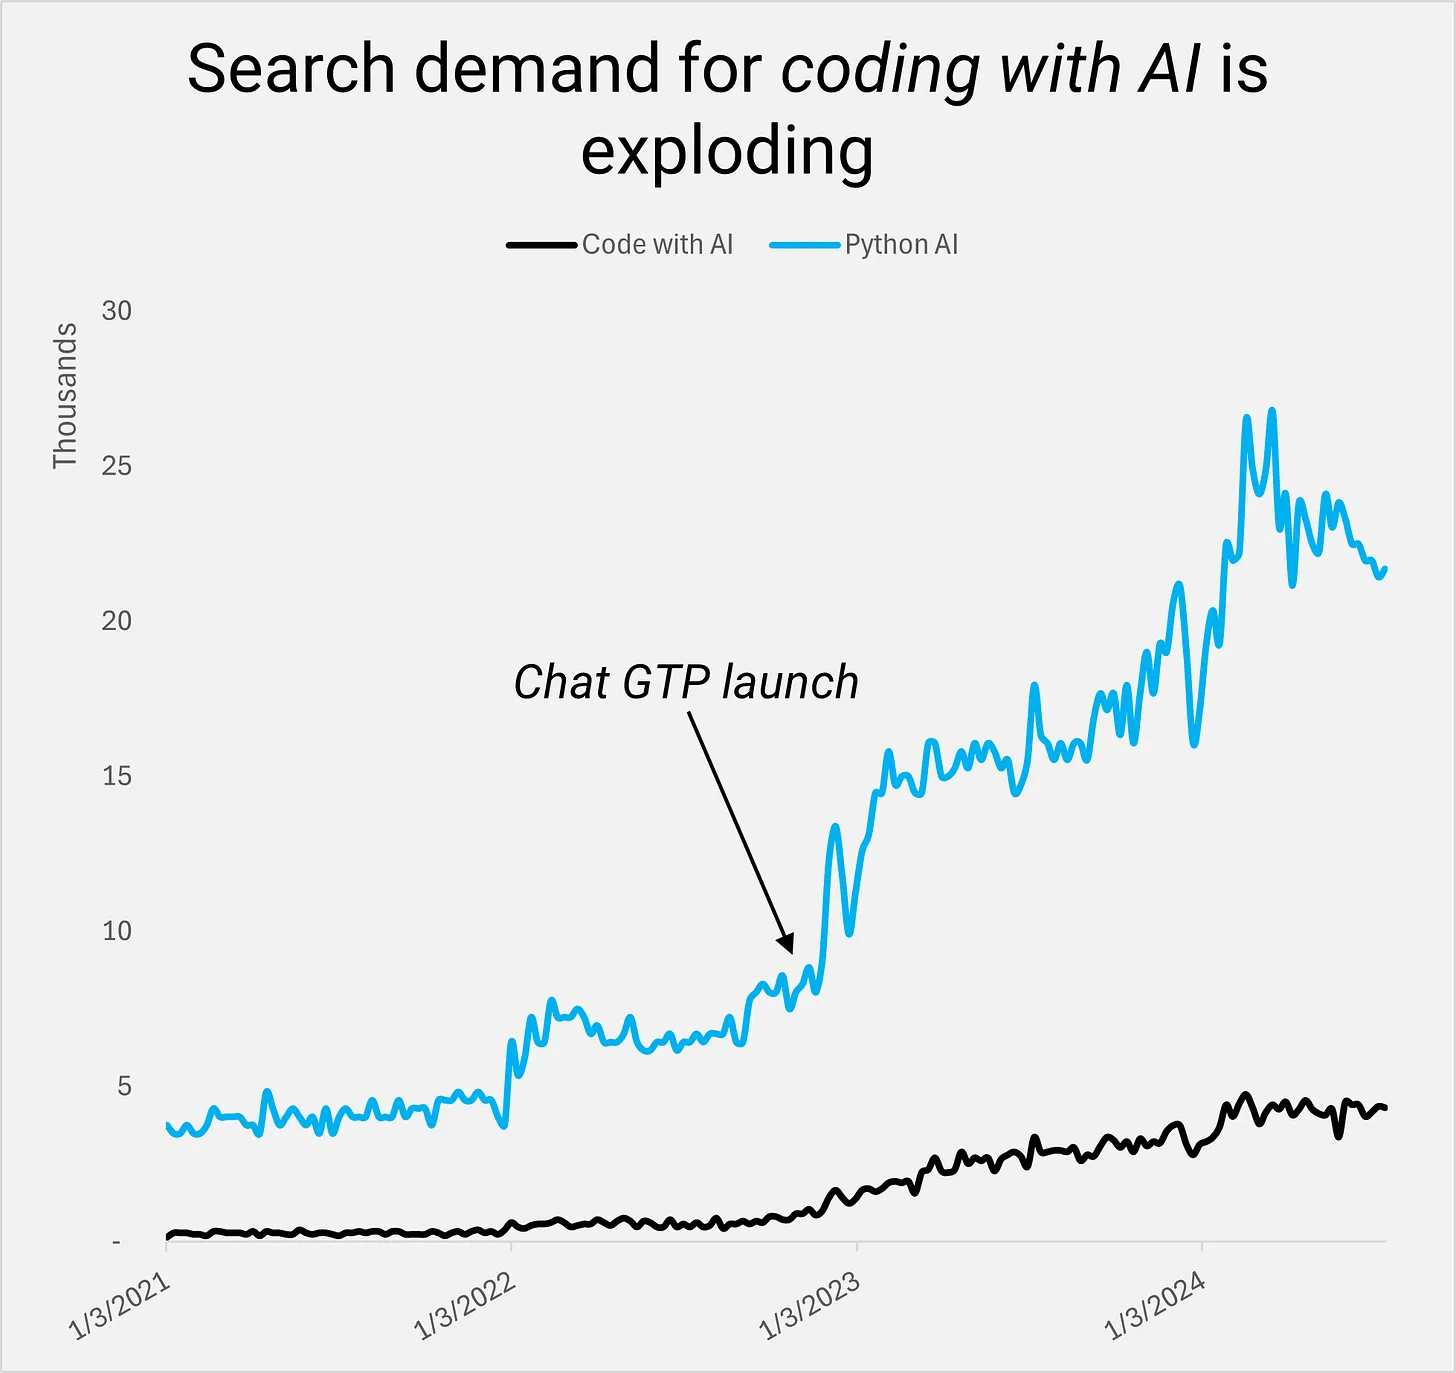 Search demand for coding with AI is exploding